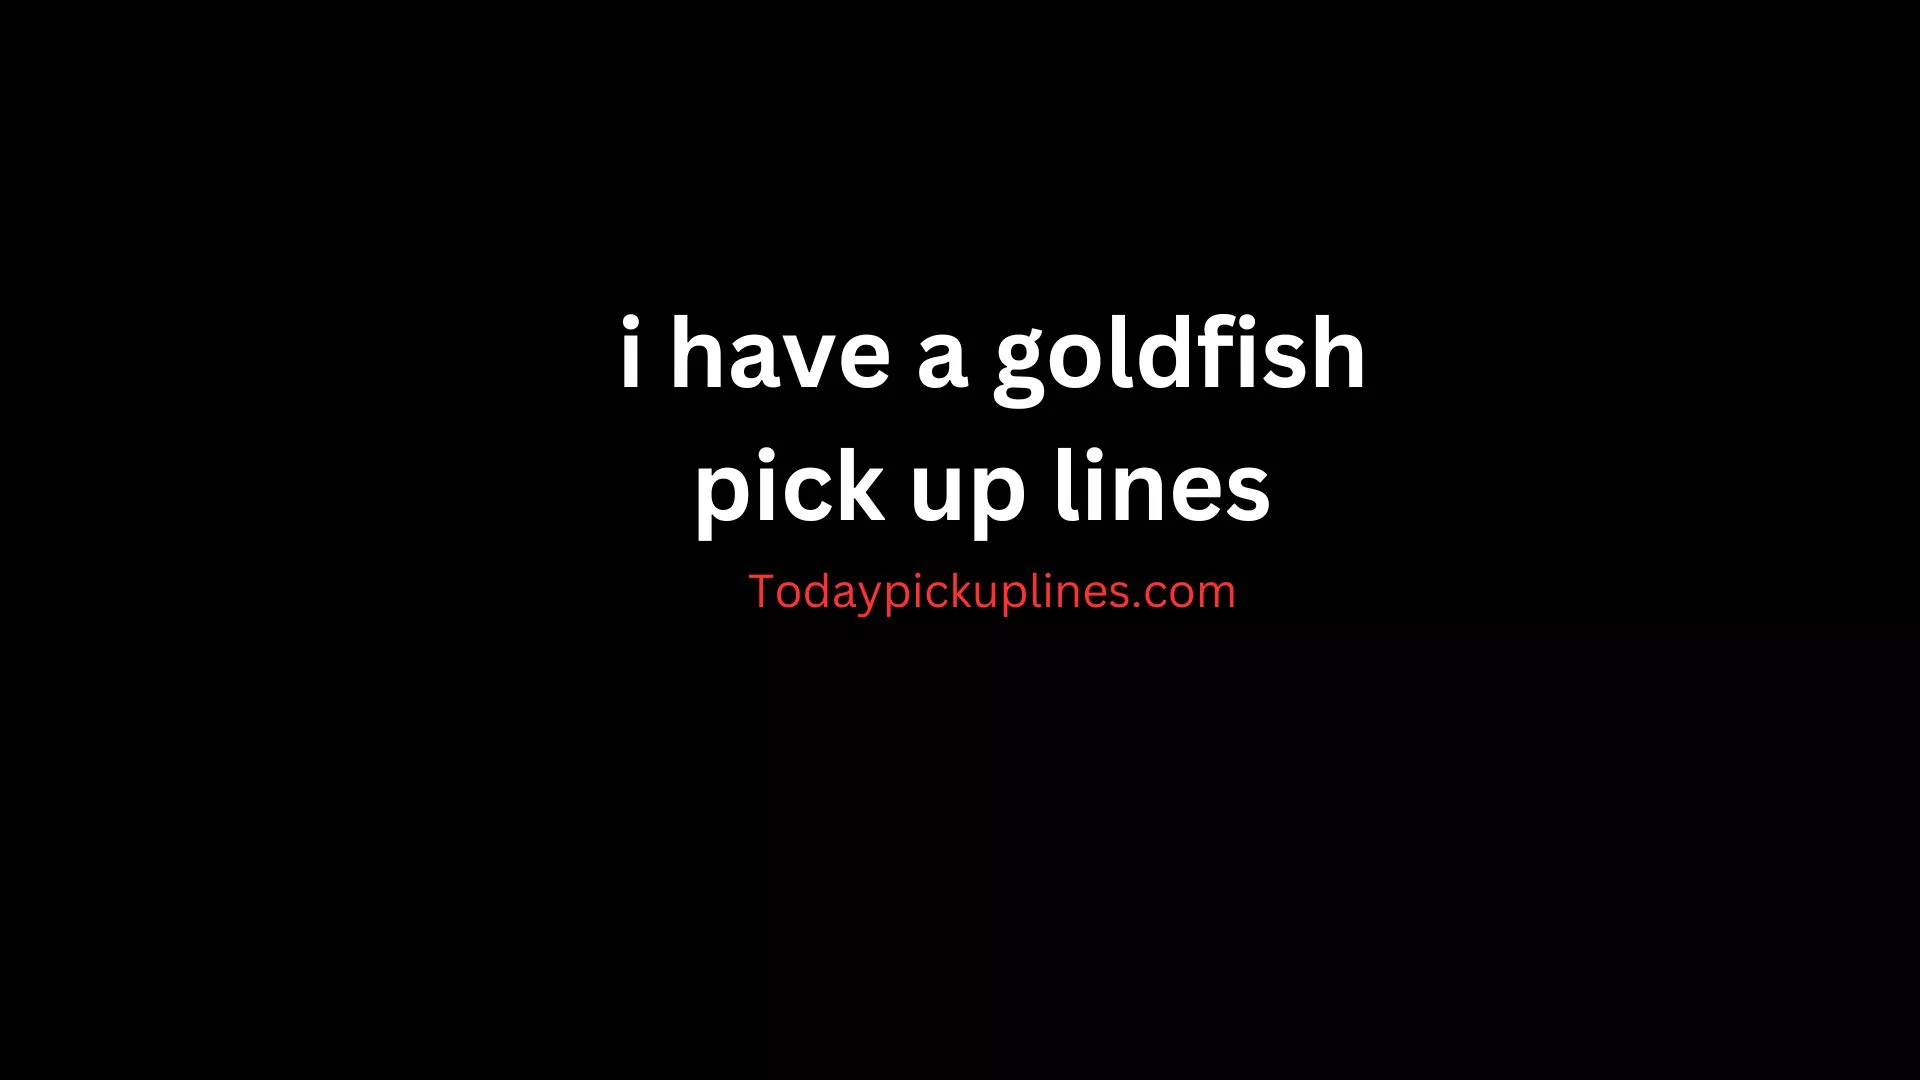 i have a goldfish pick up lines